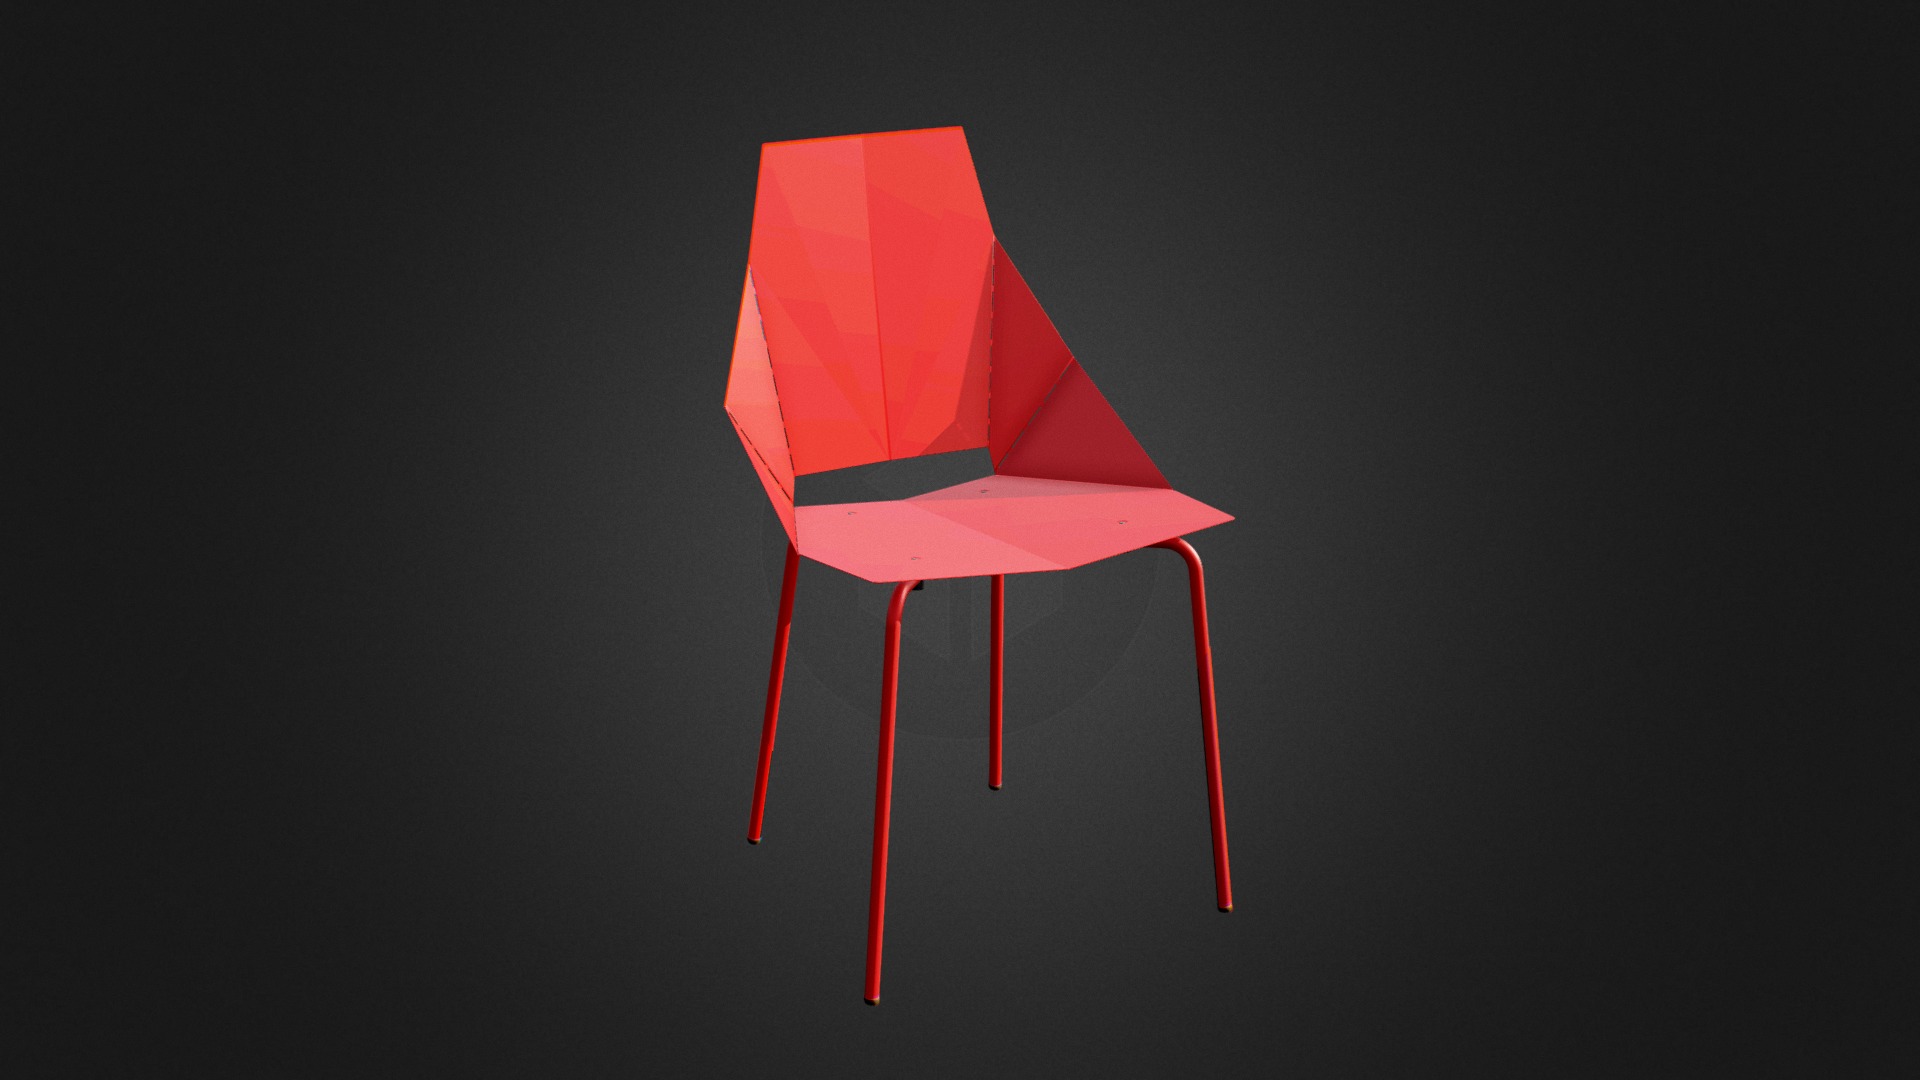 3D model Real Good Chair – Blu Dot - This is a 3D model of the Real Good Chair - Blu Dot. The 3D model is about a red triangle with a black background.